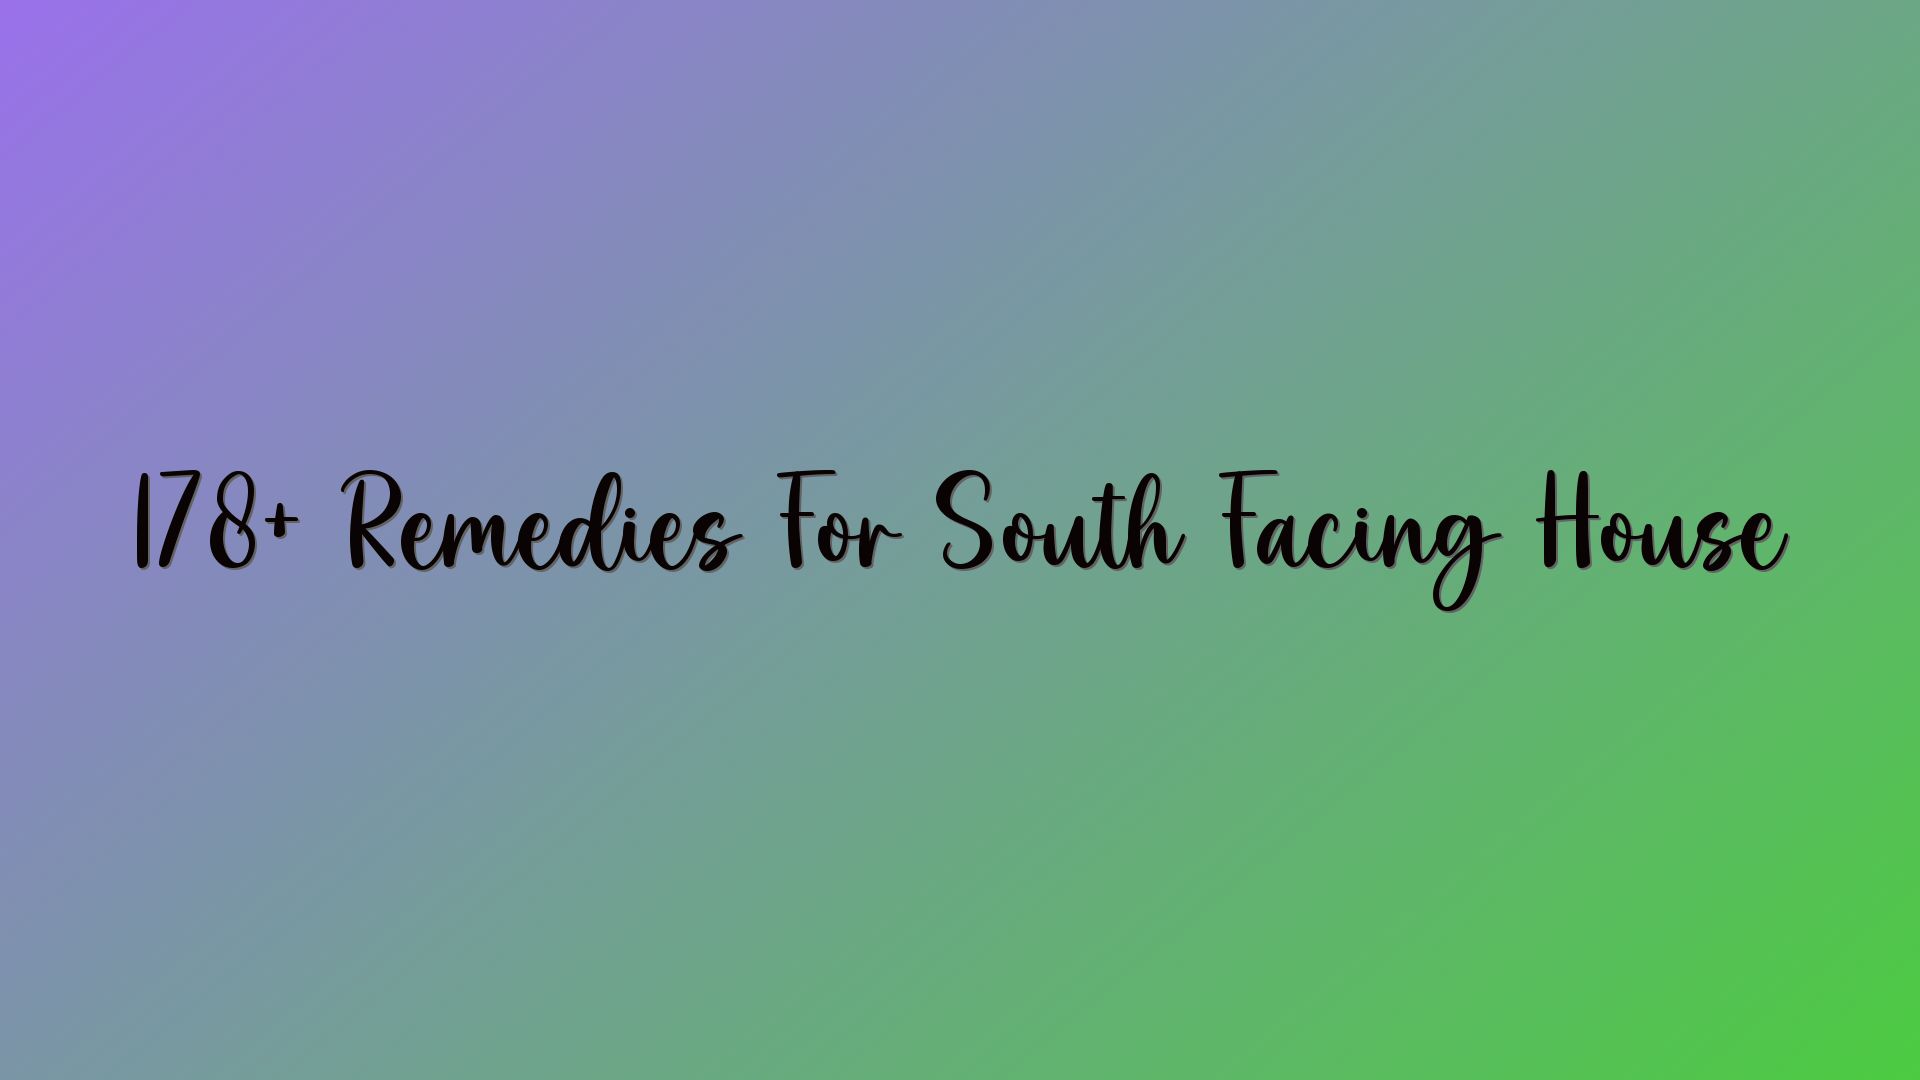 178+ Remedies For South Facing House